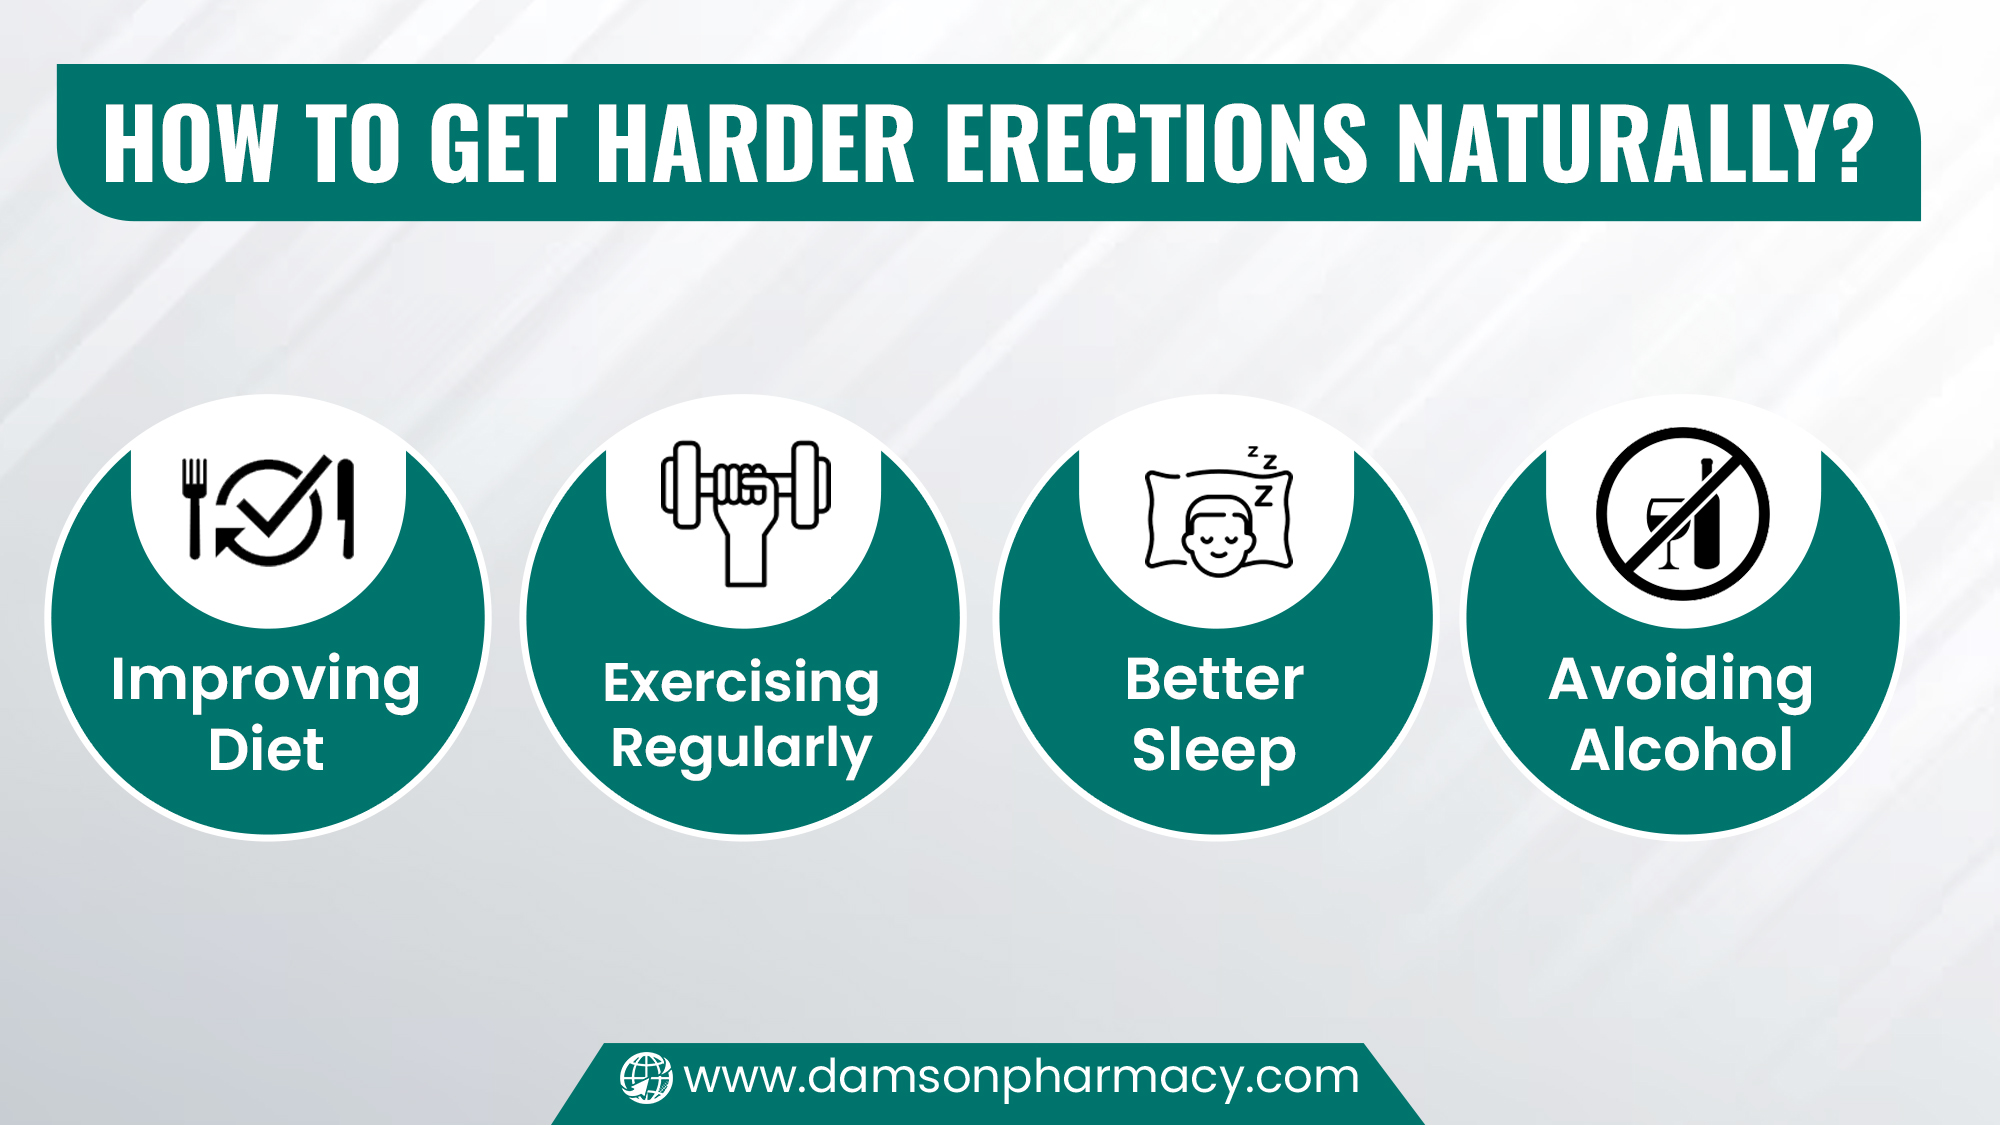 How to Get Harder Erections Naturally